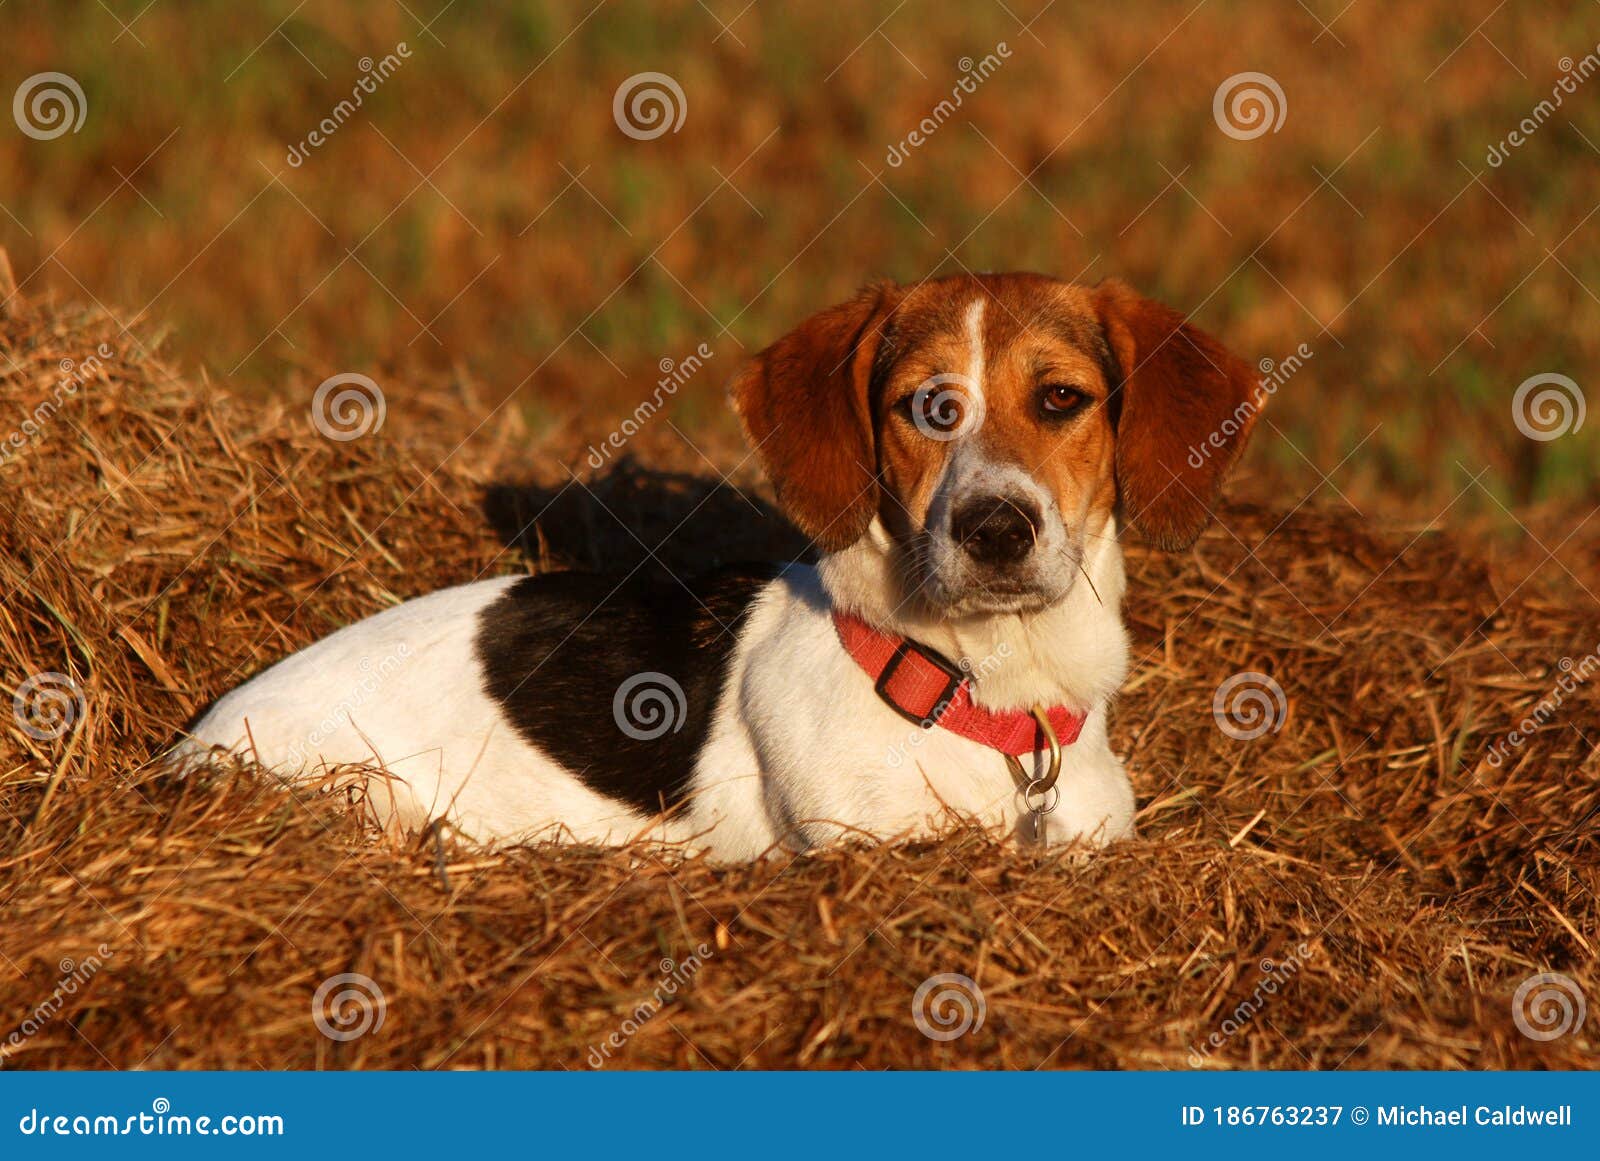 A Basset Hound Beagle Mix Poses In Straw Pile Stock Image Image Of Black Hound 186763237